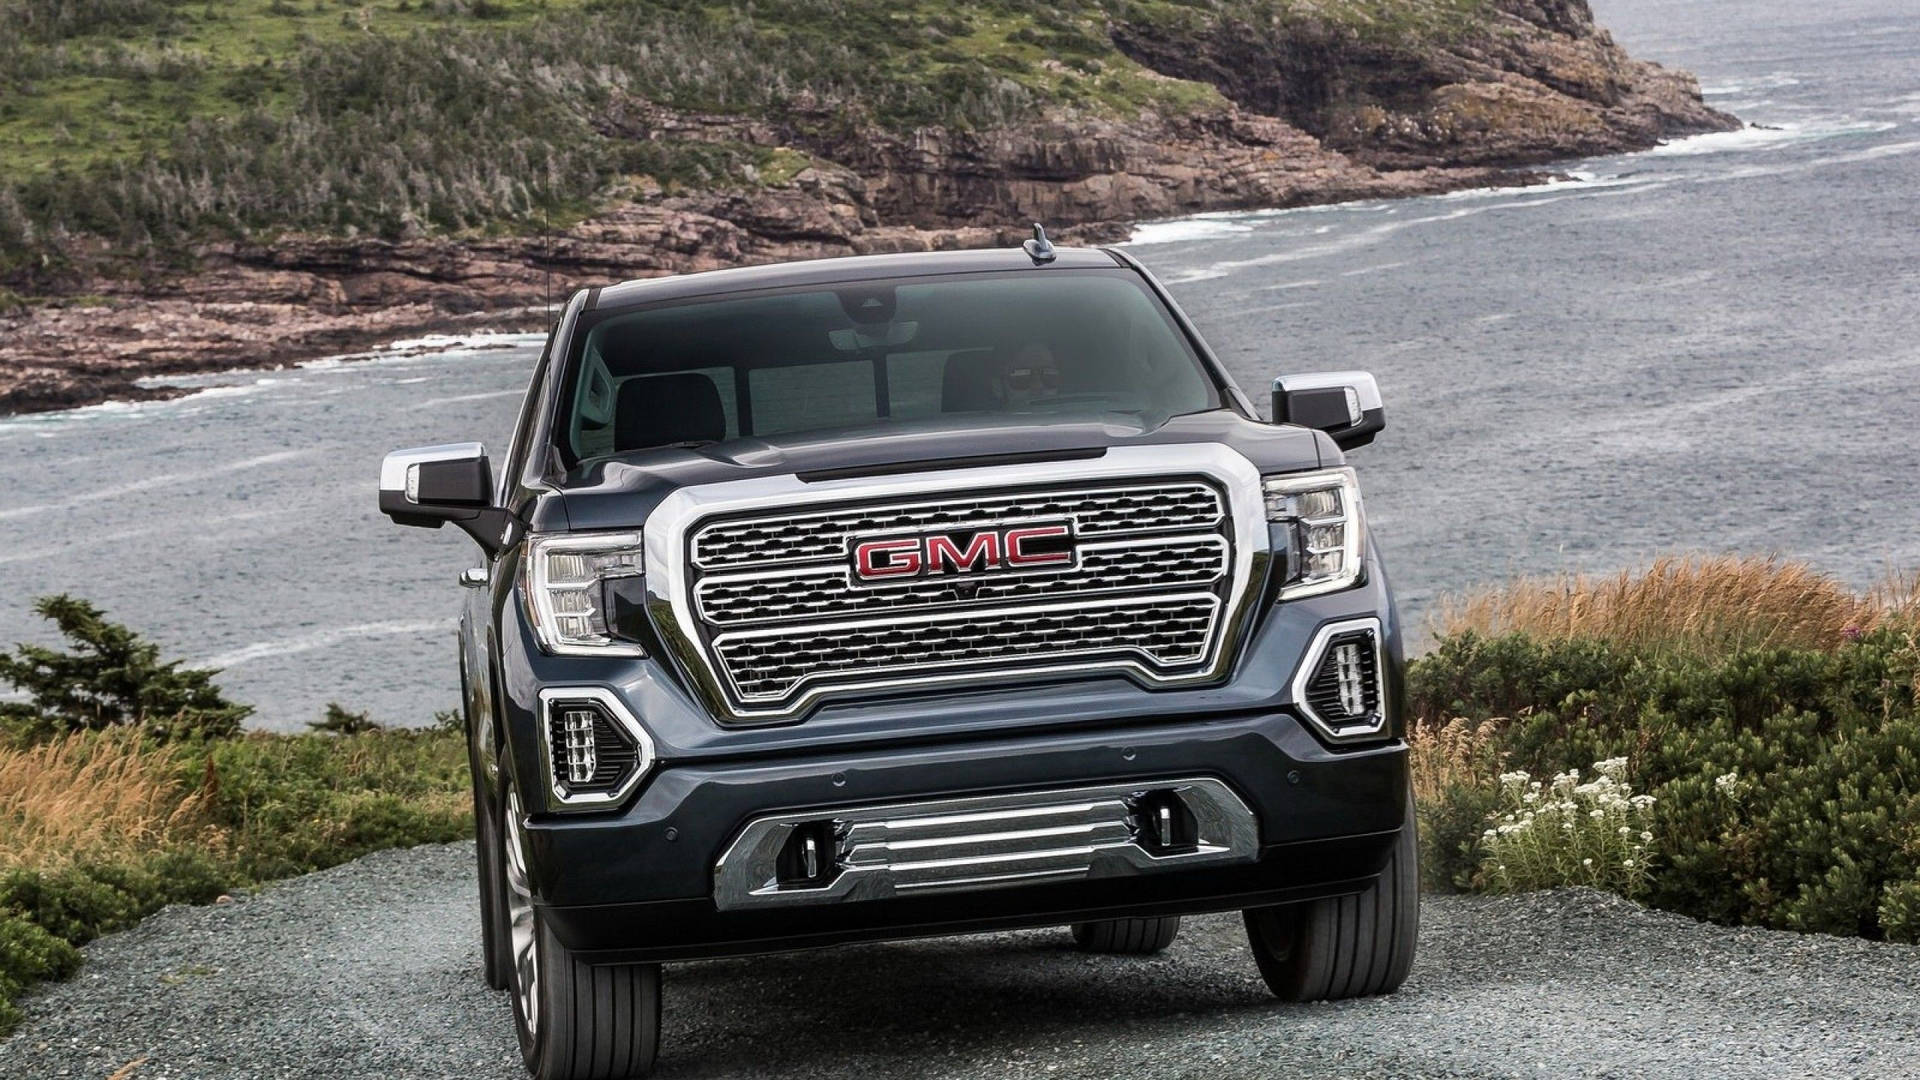 Gmc On The Uphill Road Wallpaper